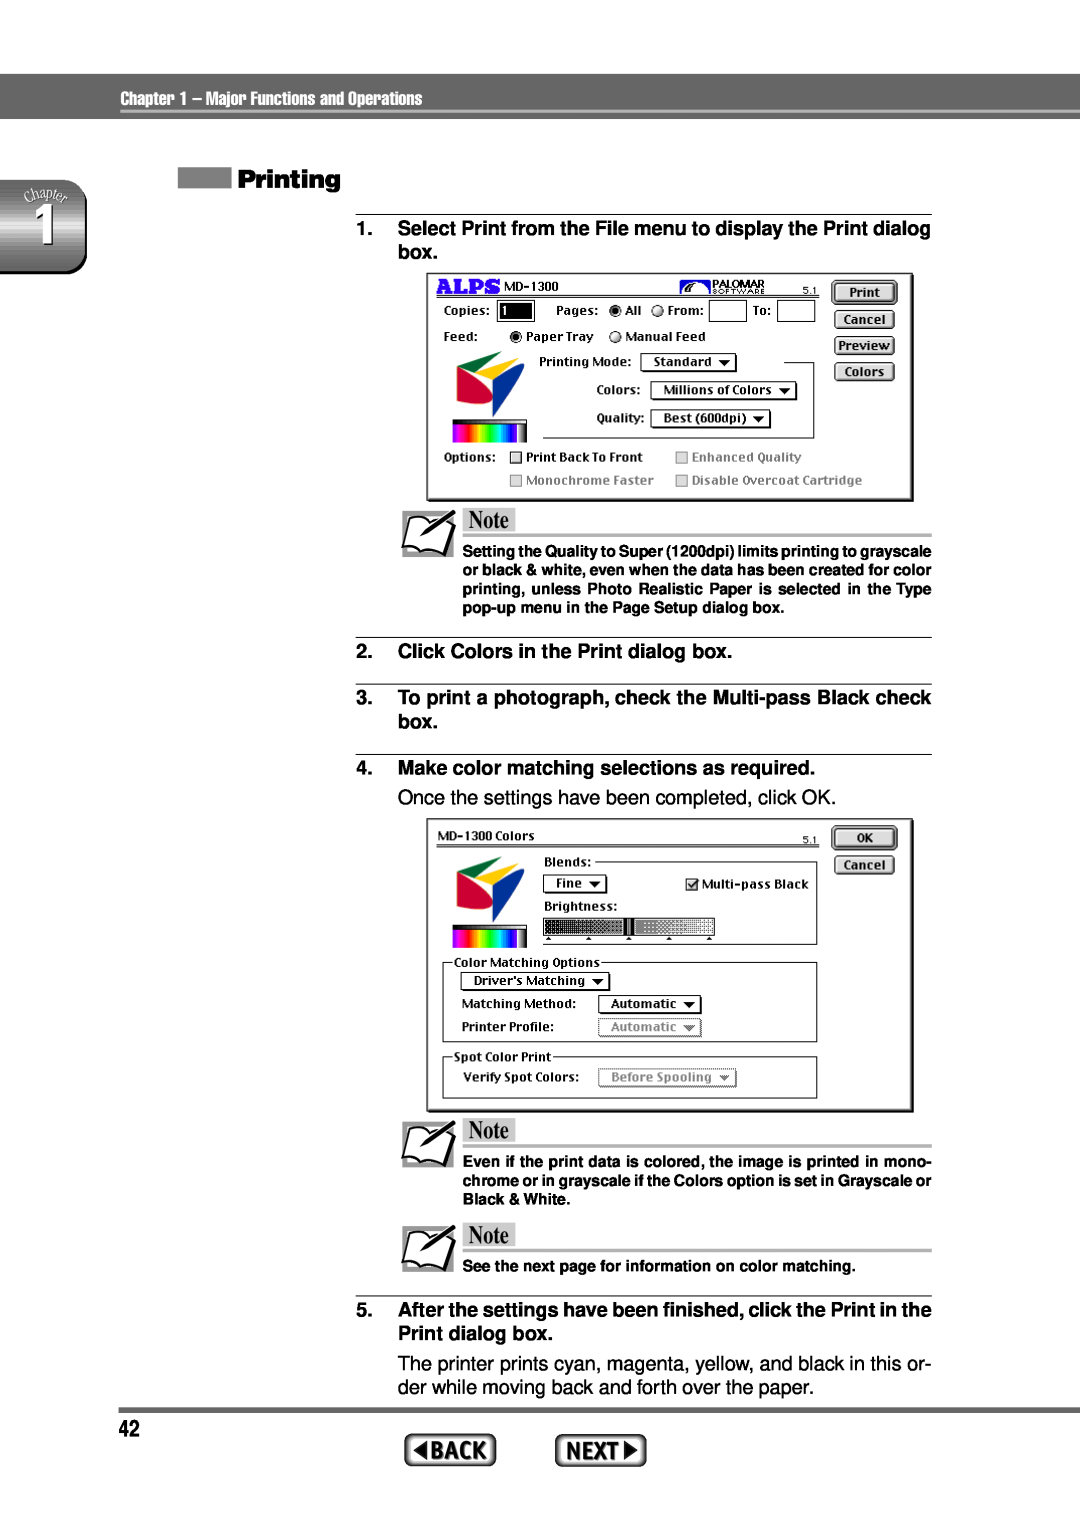 Alps Electric MD-1300 manual Printing, Select Print from the File menu to display the Print dialog box 